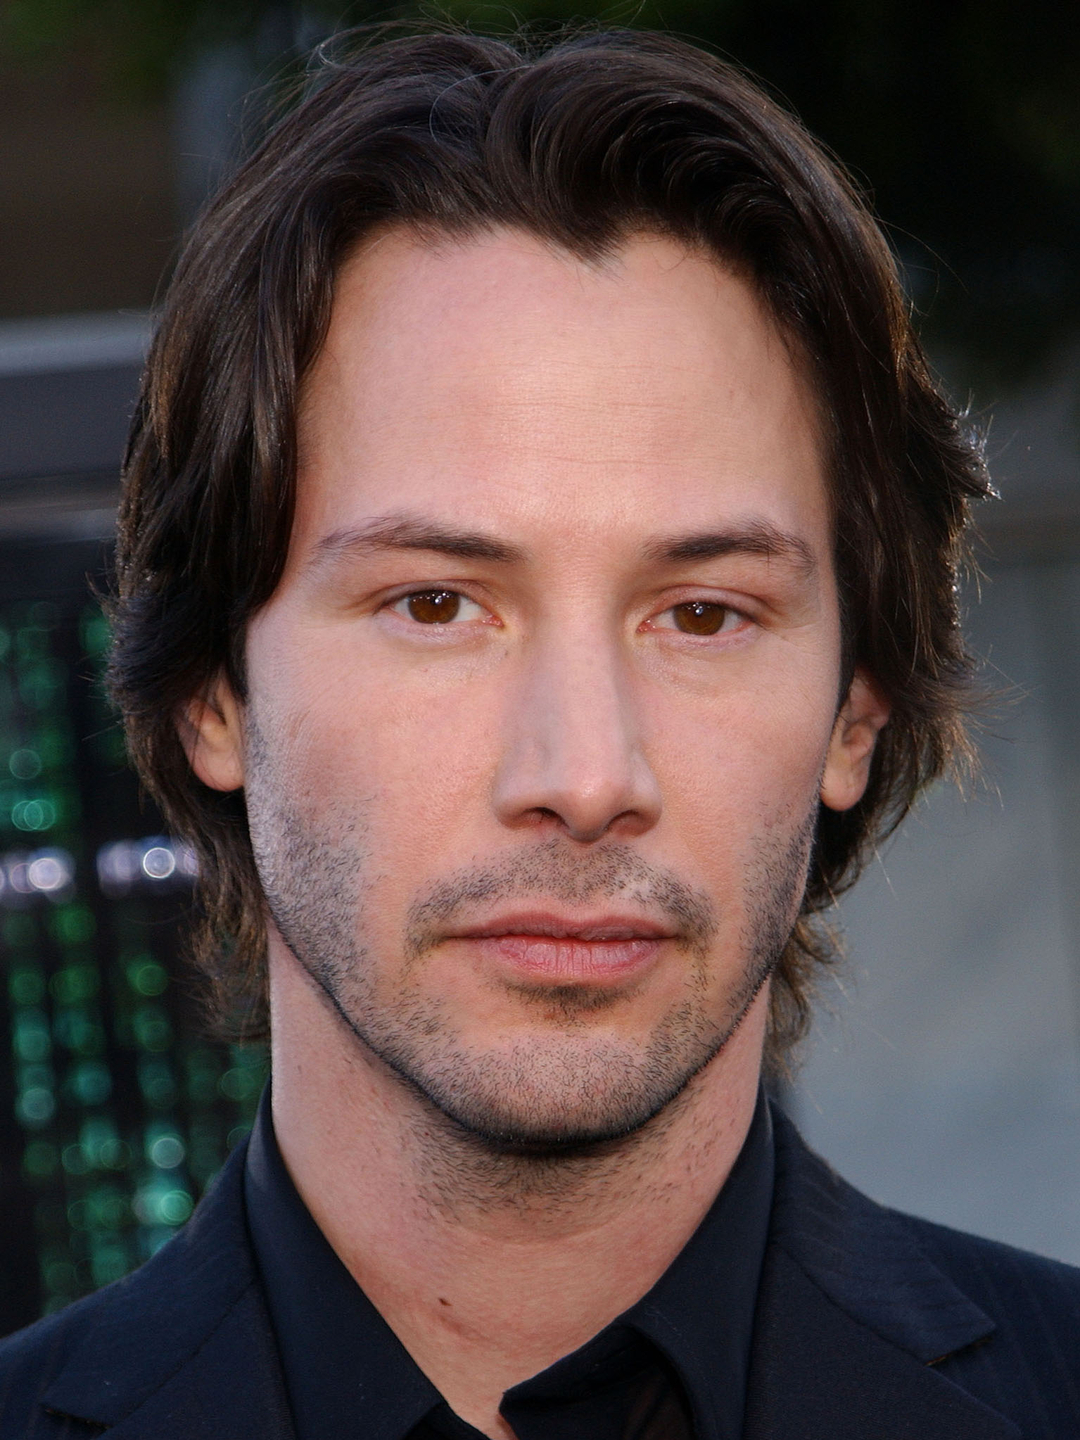 Keanu Reeves does he have a wife